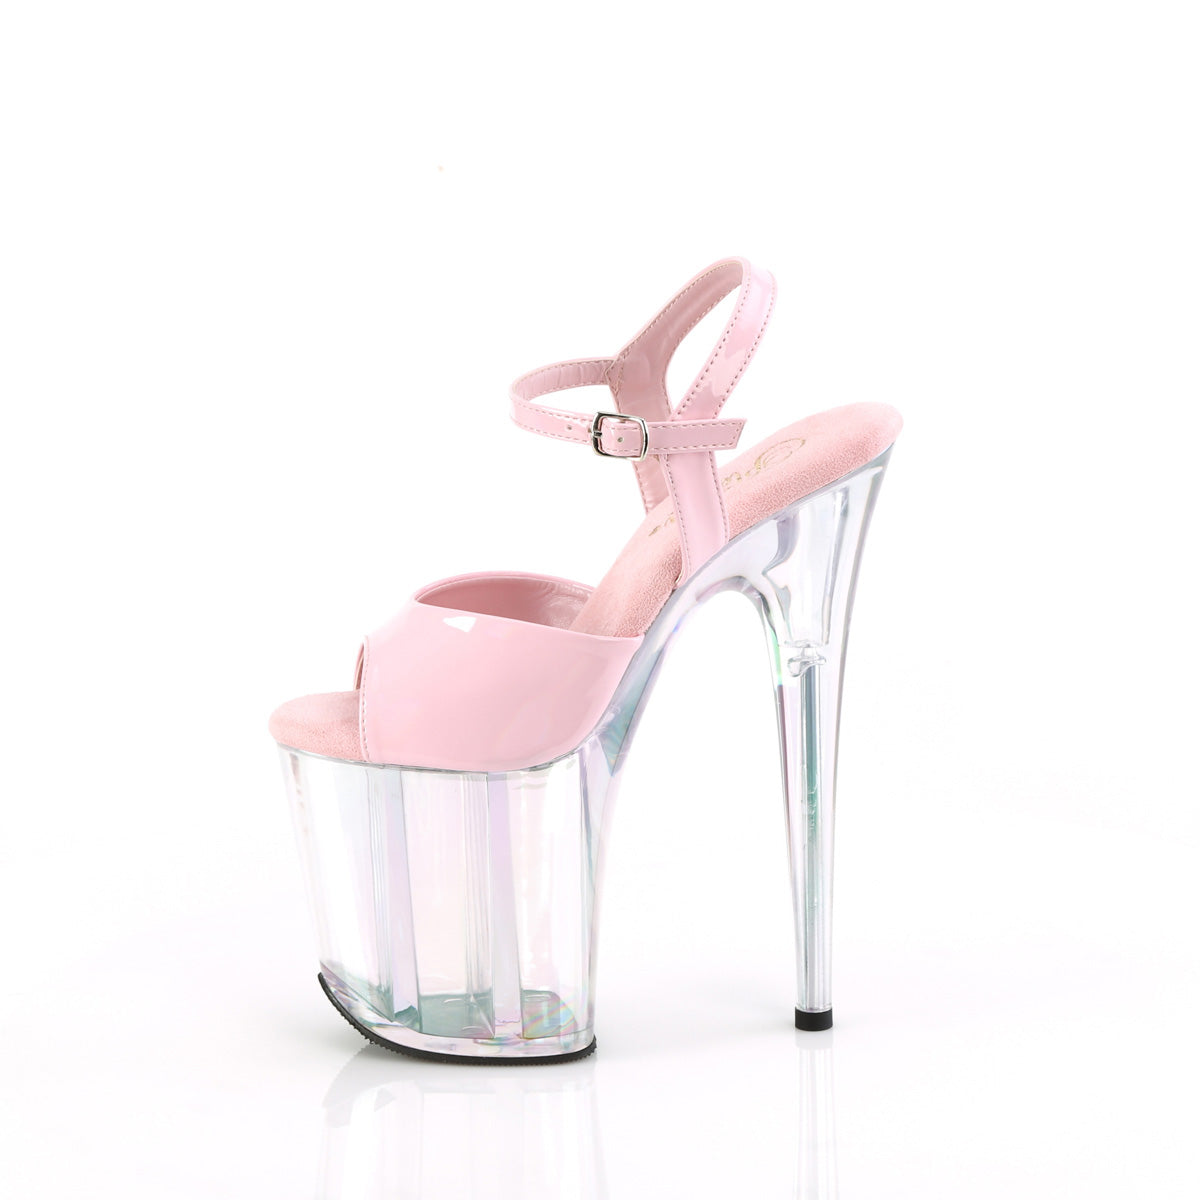 FLAMINGO-809HT Pleaser B Pink Holo Patent/Holo Tinted Platform Shoes [Exotic Dancing Shoes]